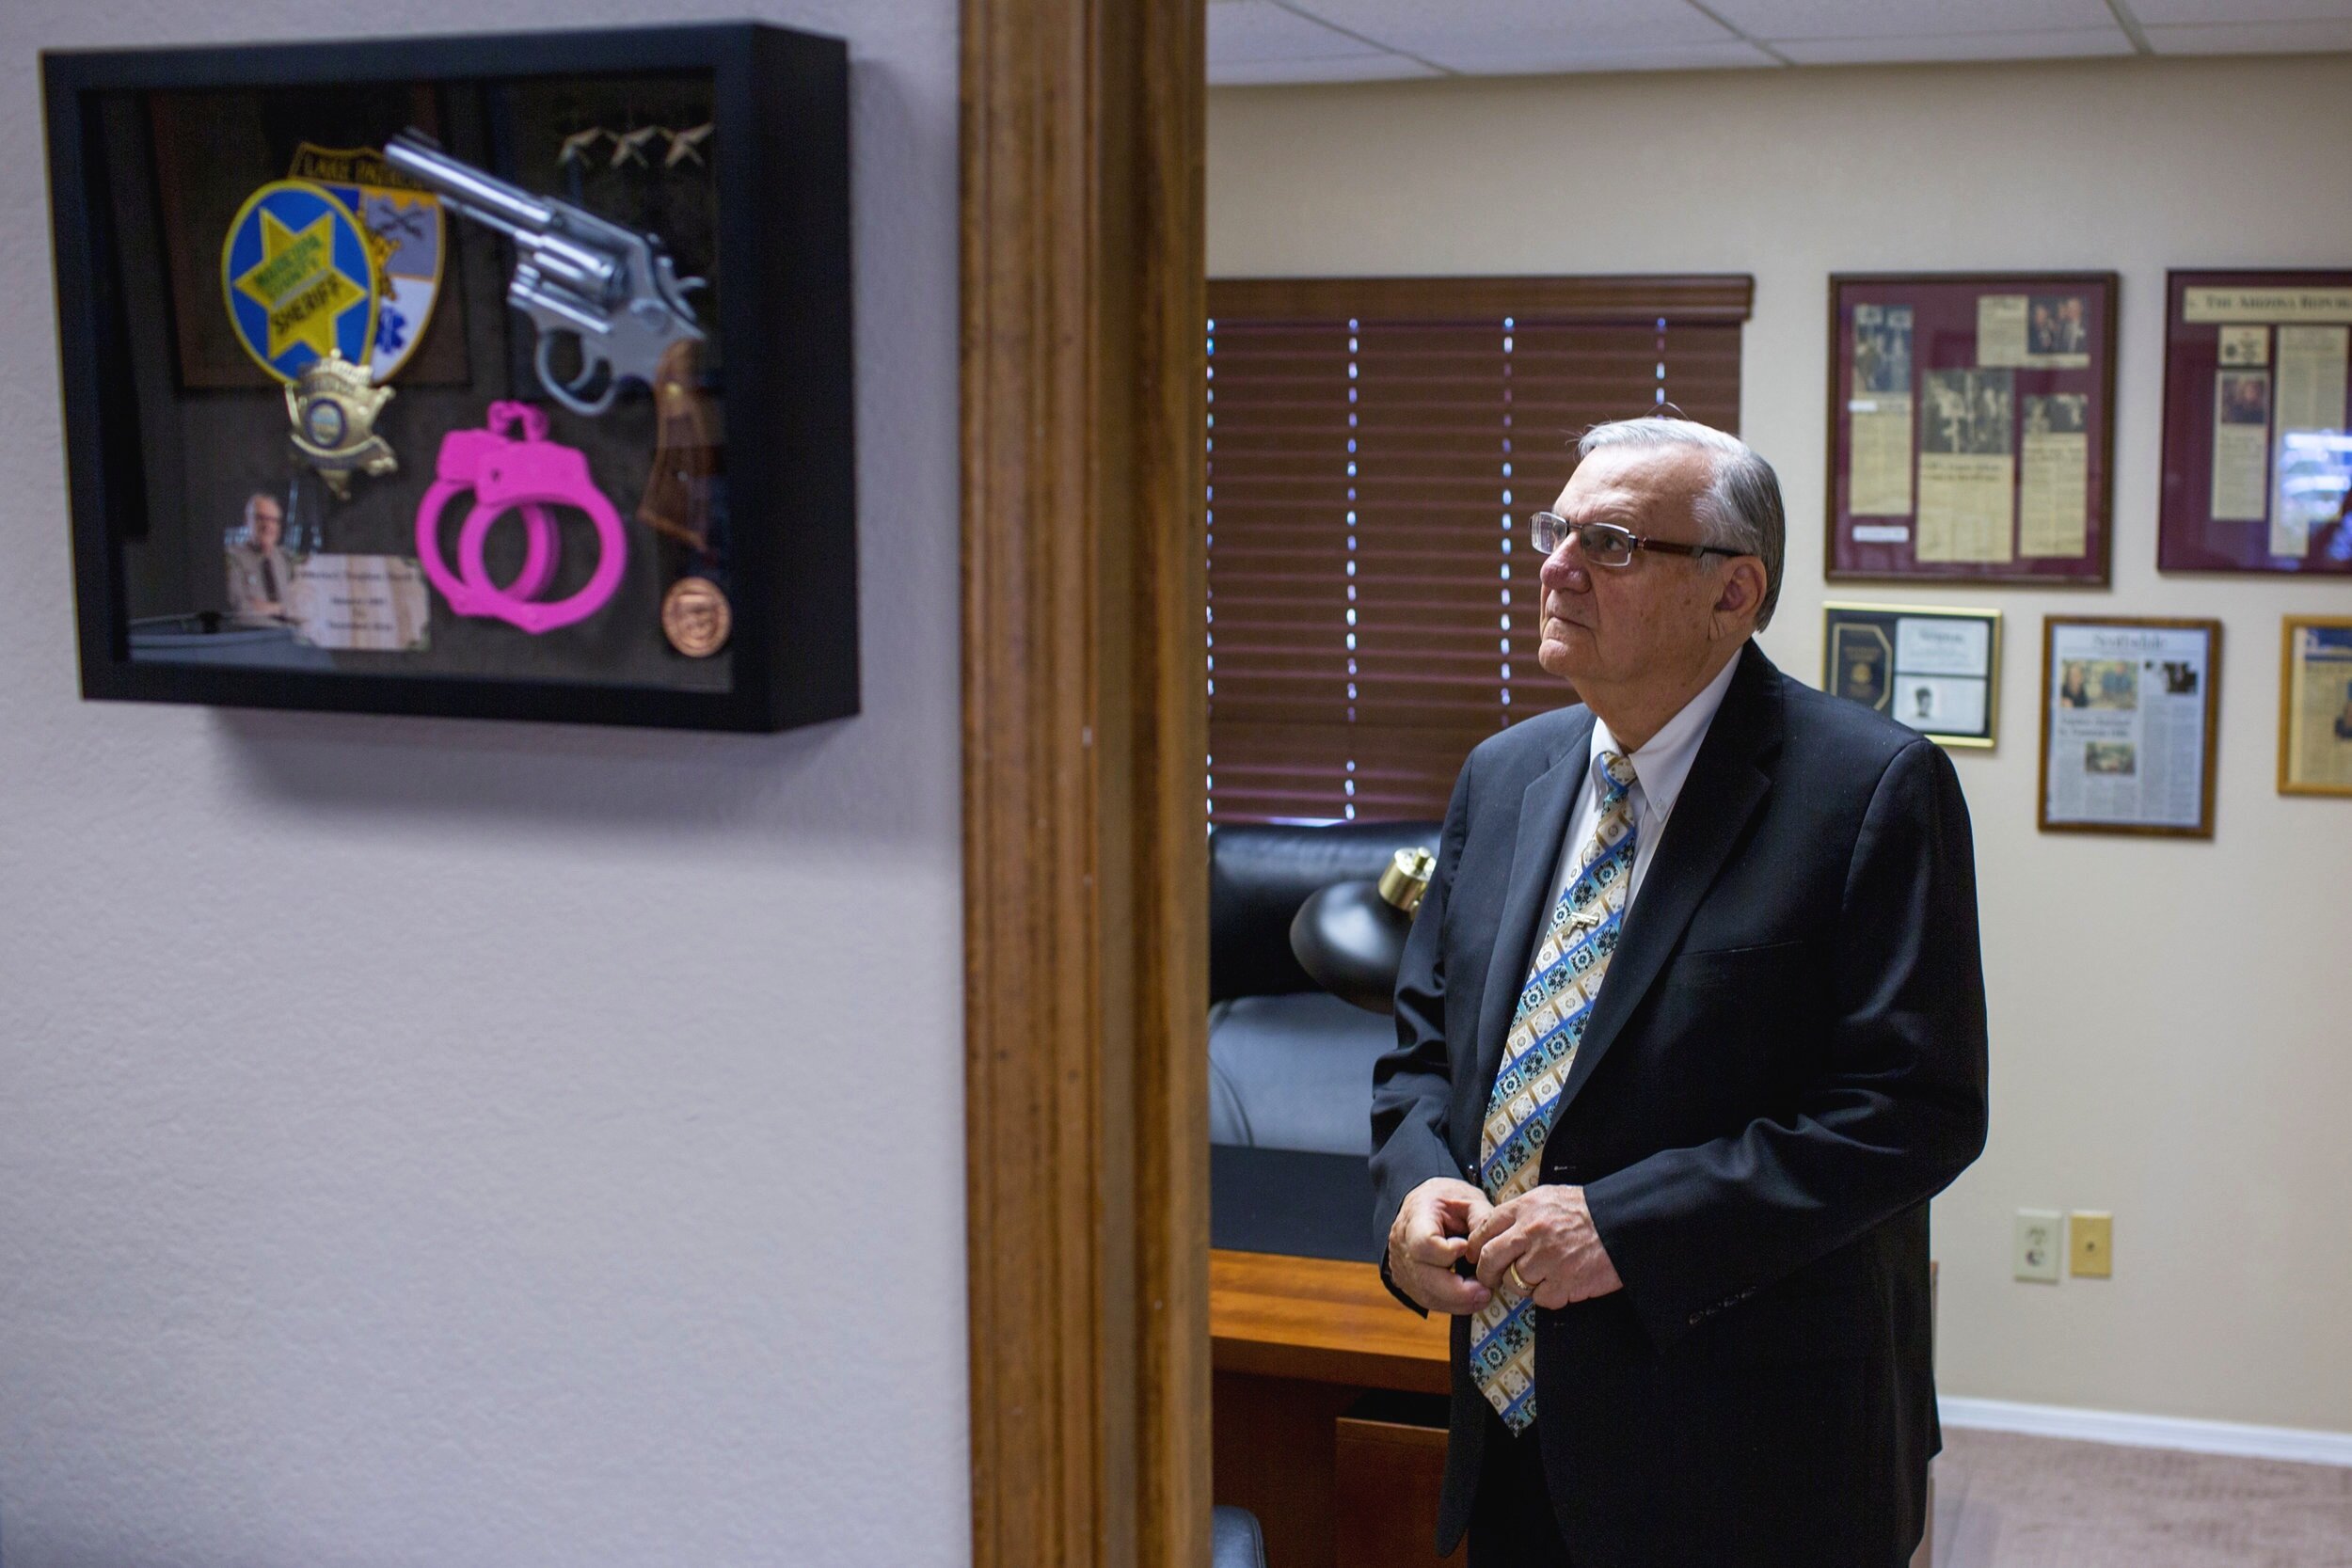  Joe Arpaio looks at newspaper clippings of himself at his office in Fountain Hills, Ariz. Arpaio was defeated for re-election as sheriff of Maricopa County, Ariz.&nbsp;(Courtney Pedroza for The New York Times) 